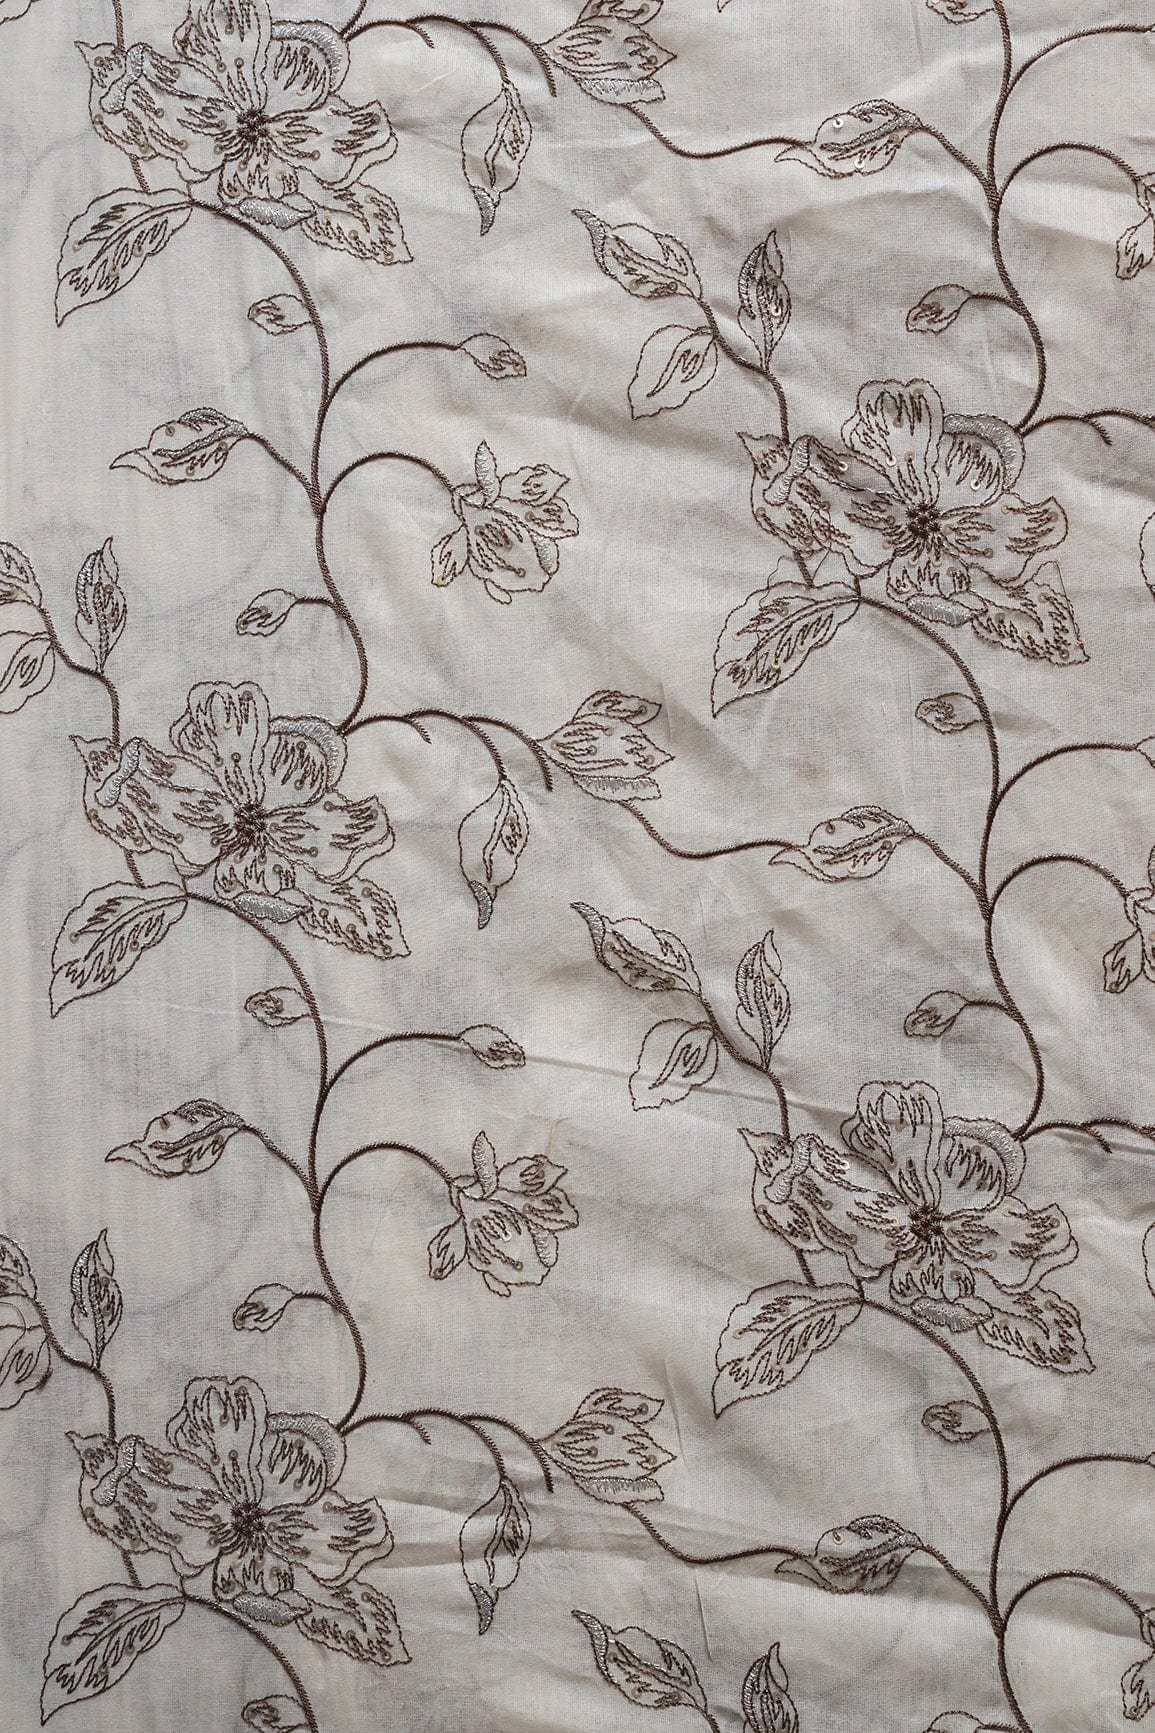 doeraa Embroidery Fabrics Brown Thread With Silver Sequins Floral Embroidery Work On White Organic Cotton Fabric